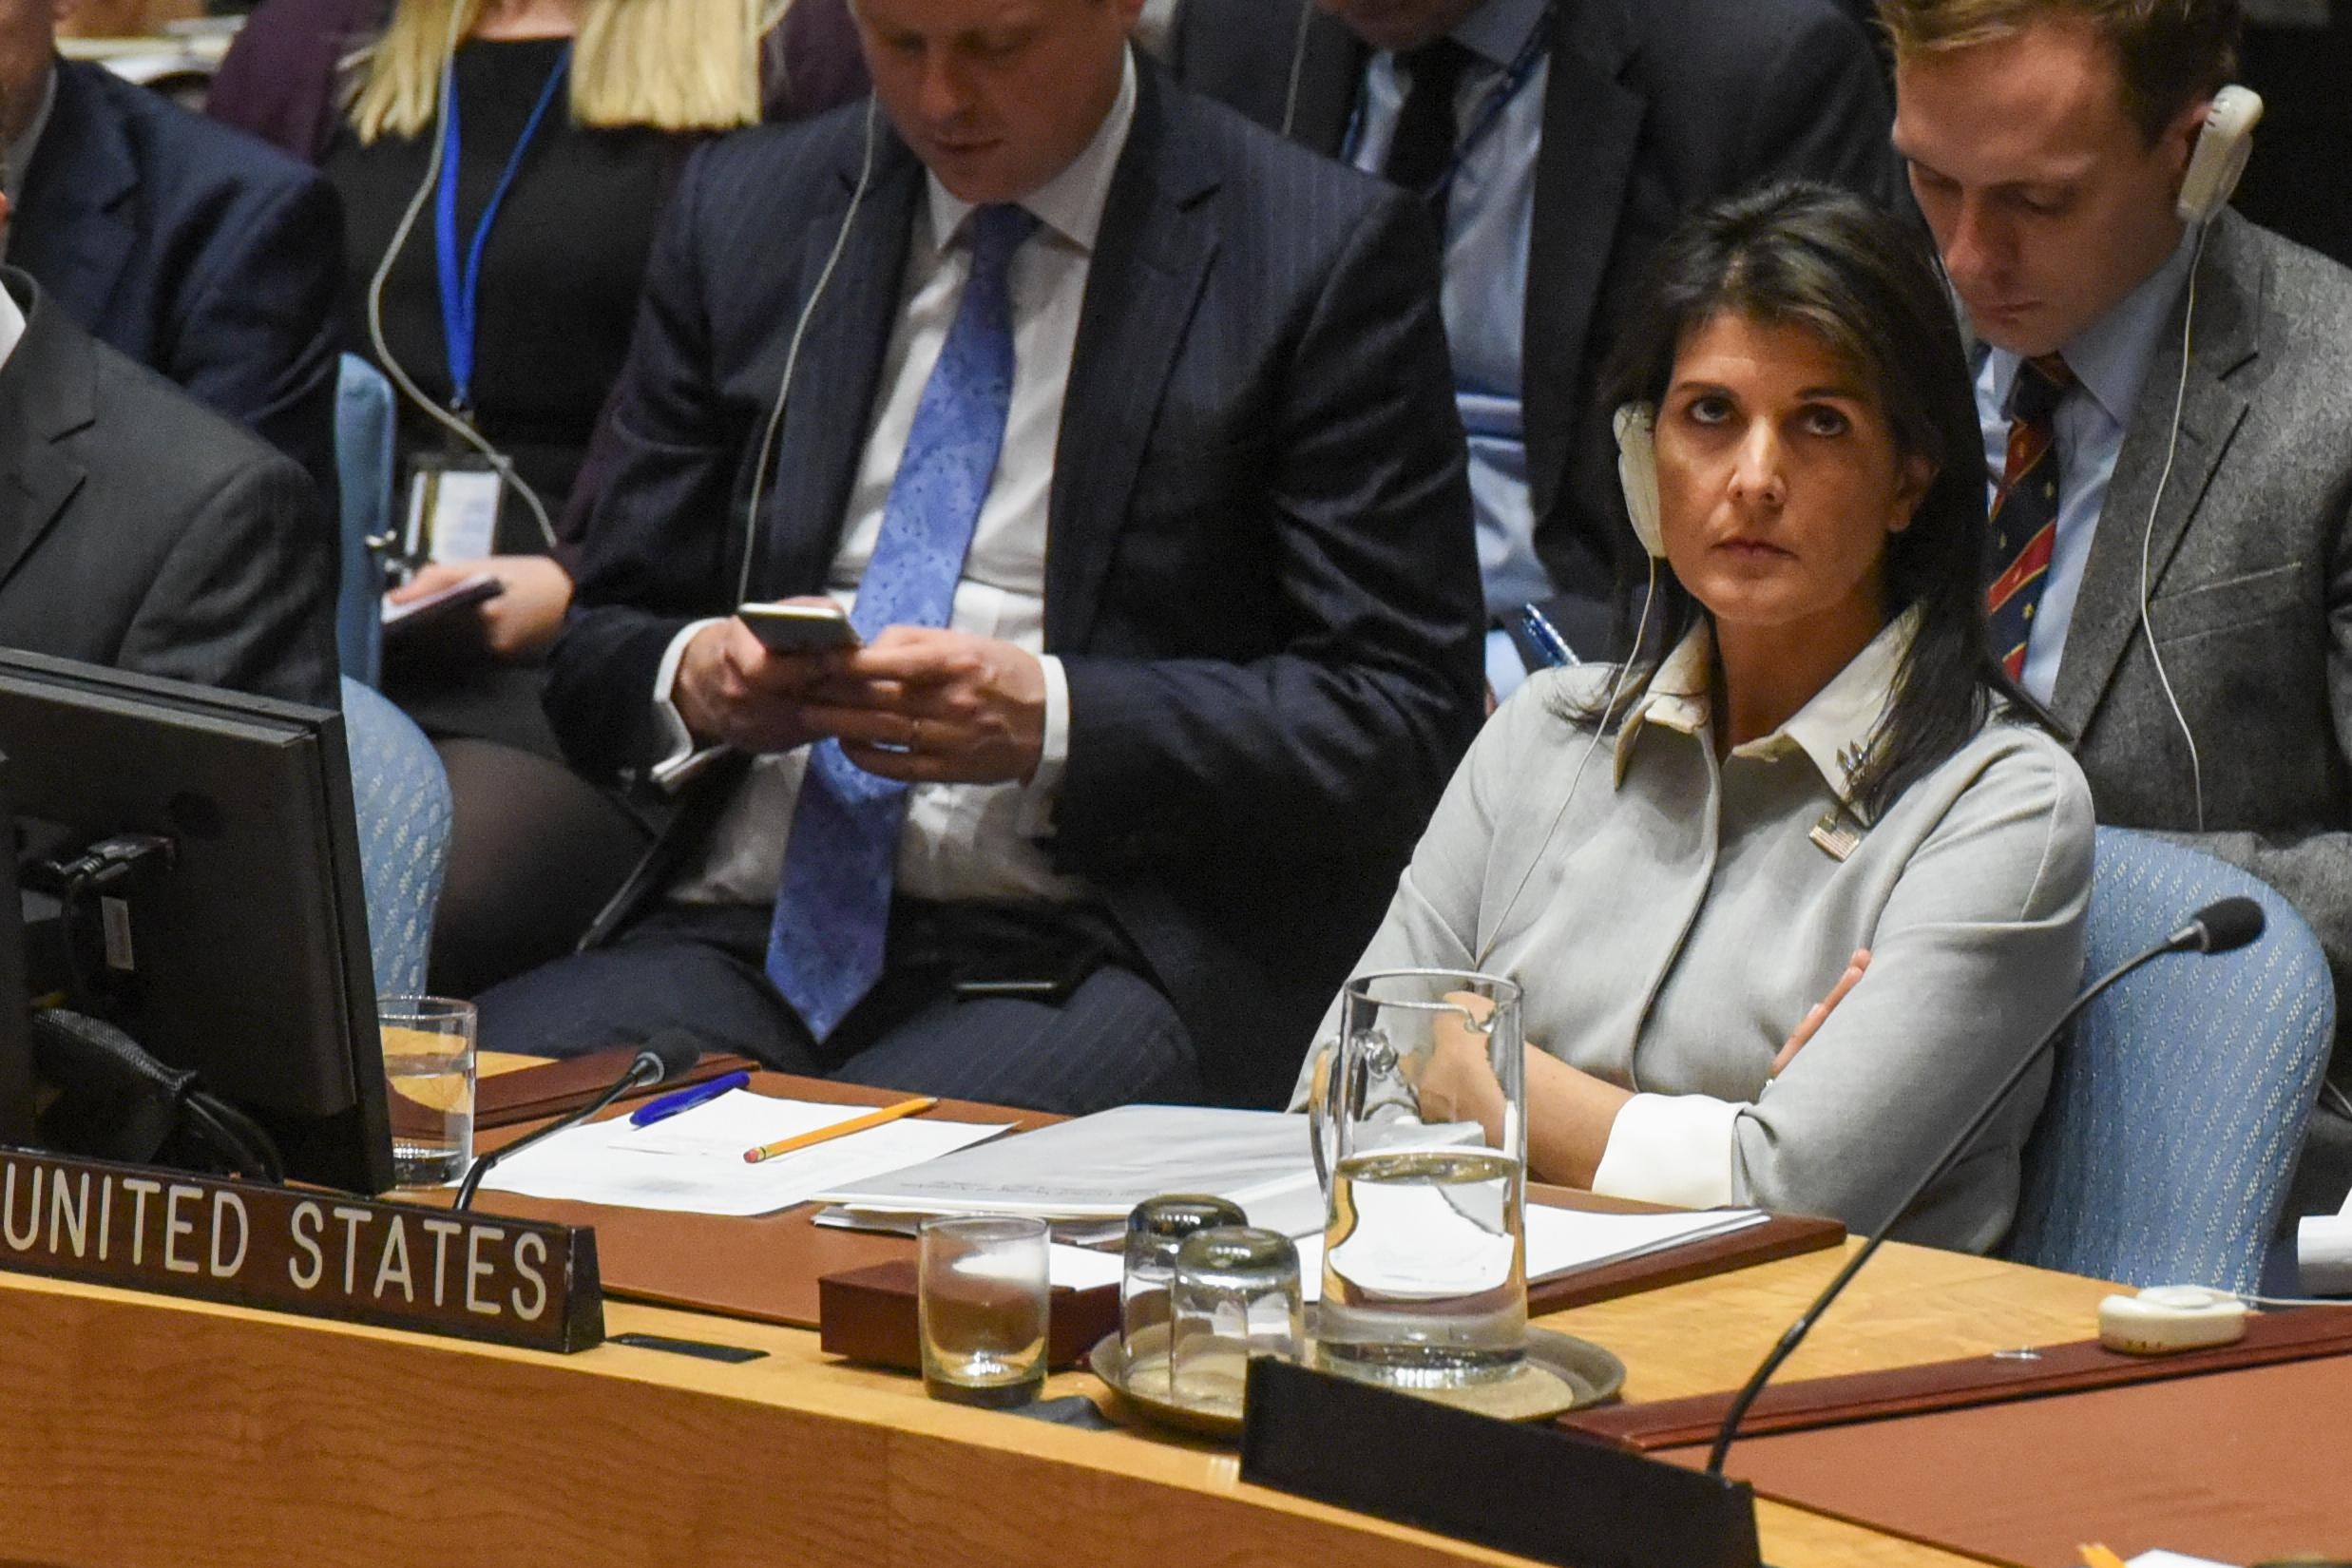 U.S. Ambassador to the United Nations Nikki Haley listens to a speech during a United Nations Security Council meeting on the situation in Palestine at the United Nations headquarters on December 8, 2017 in New York City. Deadly clashes broke out in Jerusalem and the West Bank after US President Donald Trump's decision to recognize Jerusalem as the capital of Israel.